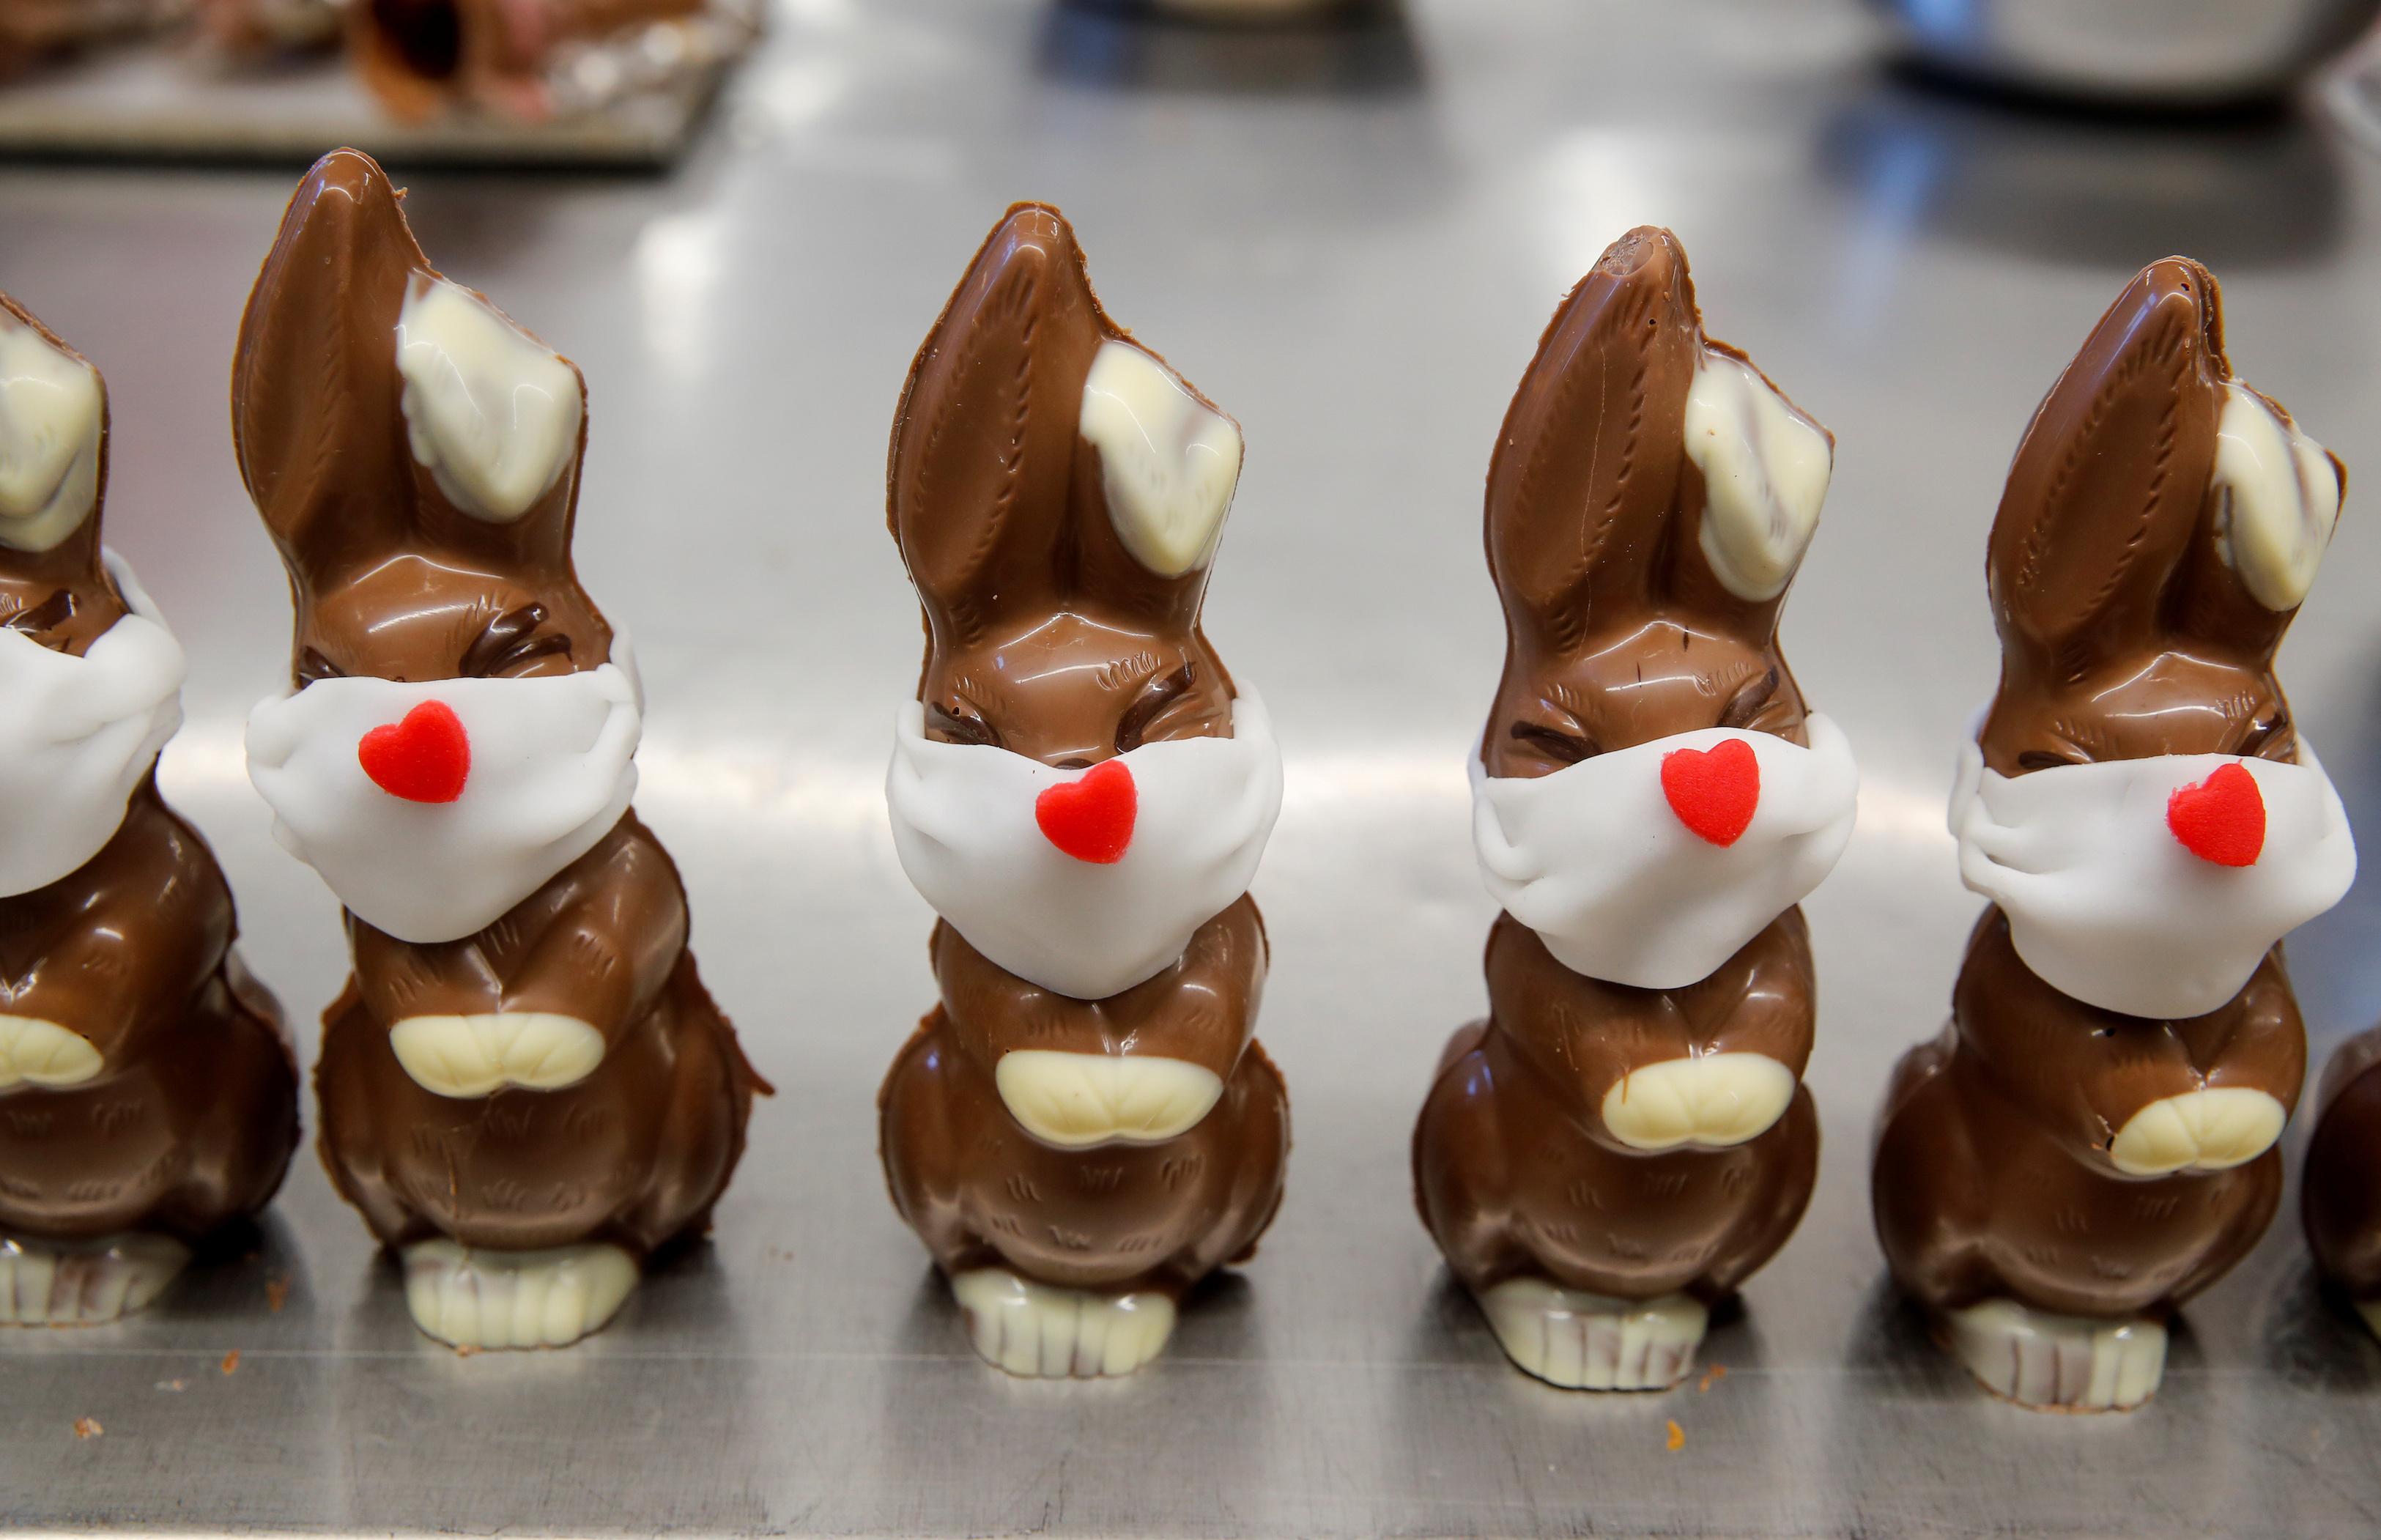 Chocolate Easter bunnies get face masks in age of coronavirus